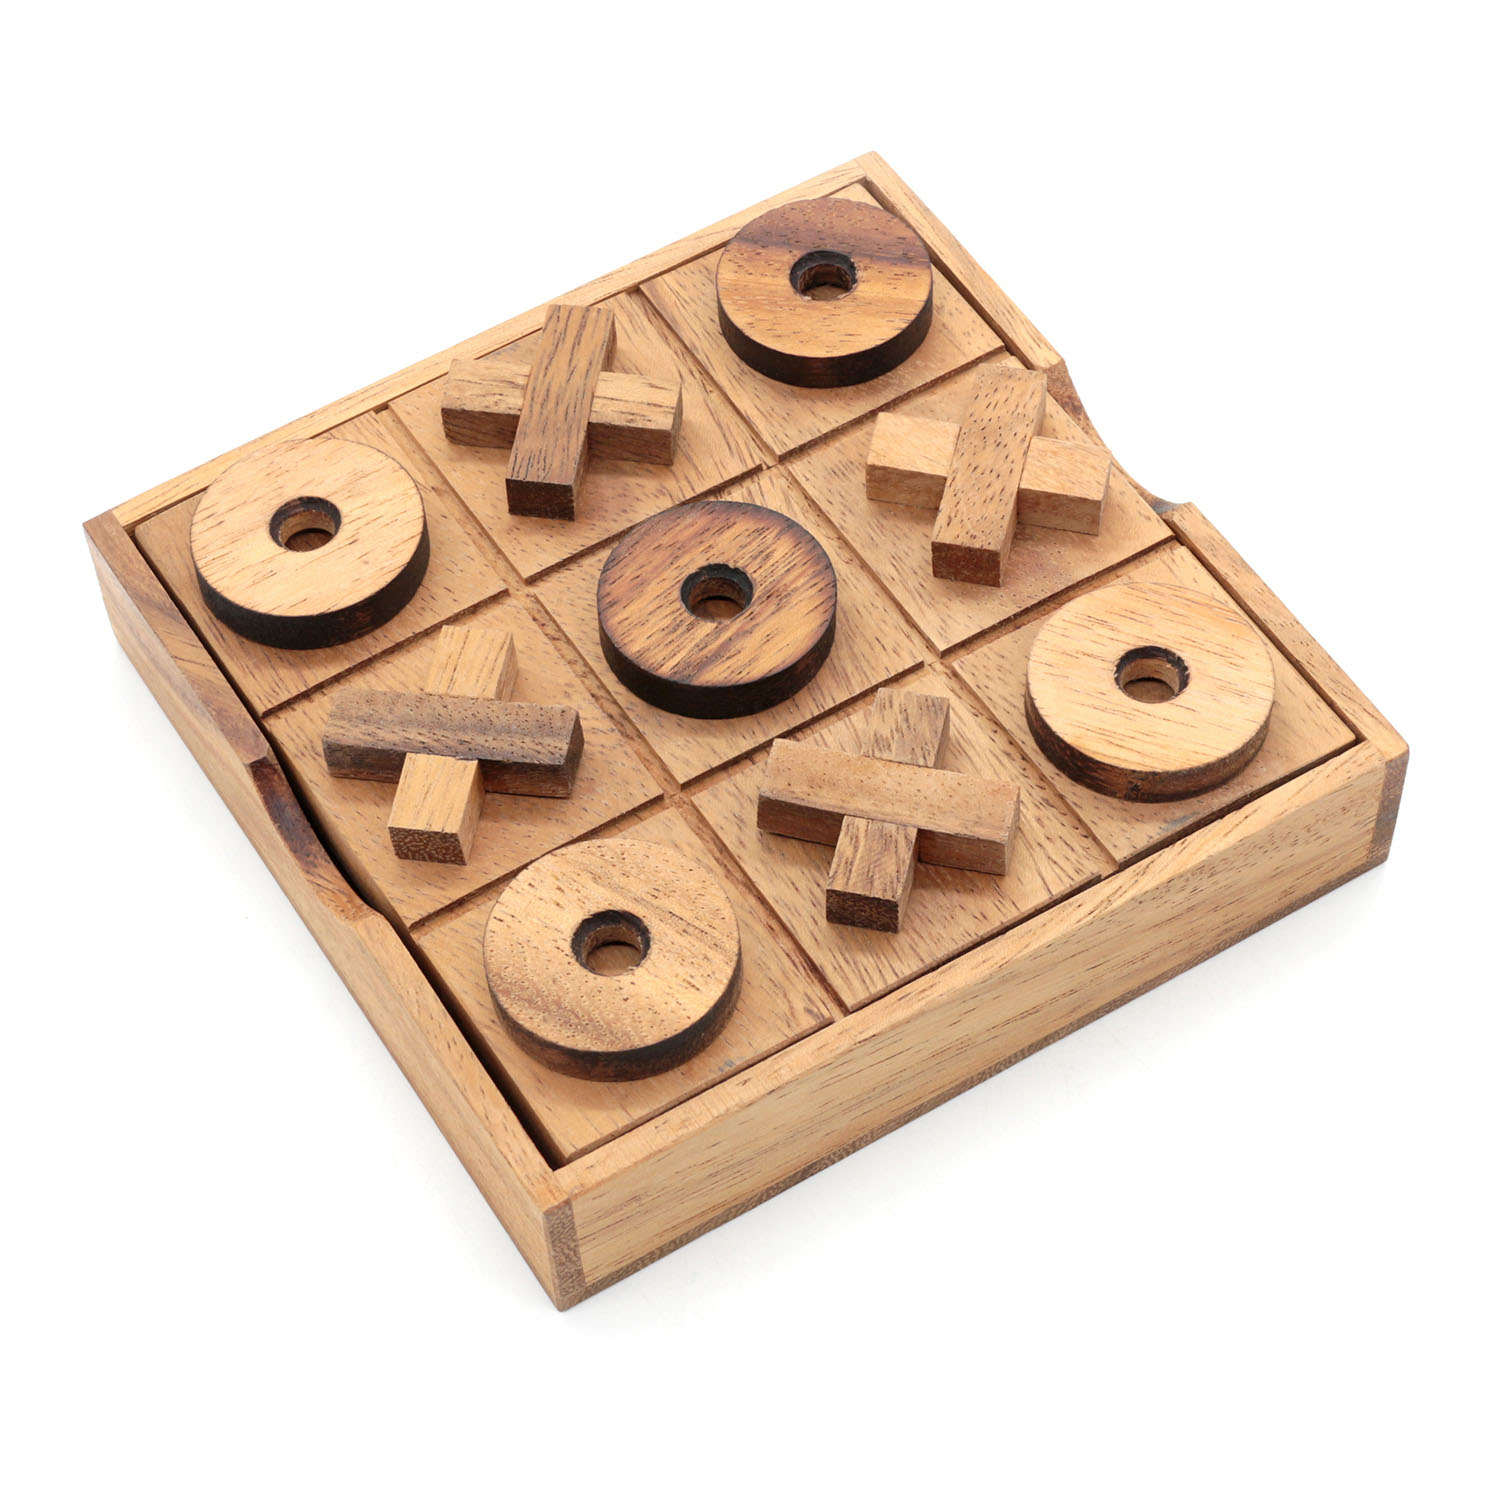 5x5 Tic Tac Toe Box With Glass Lid Coffee Table Game 